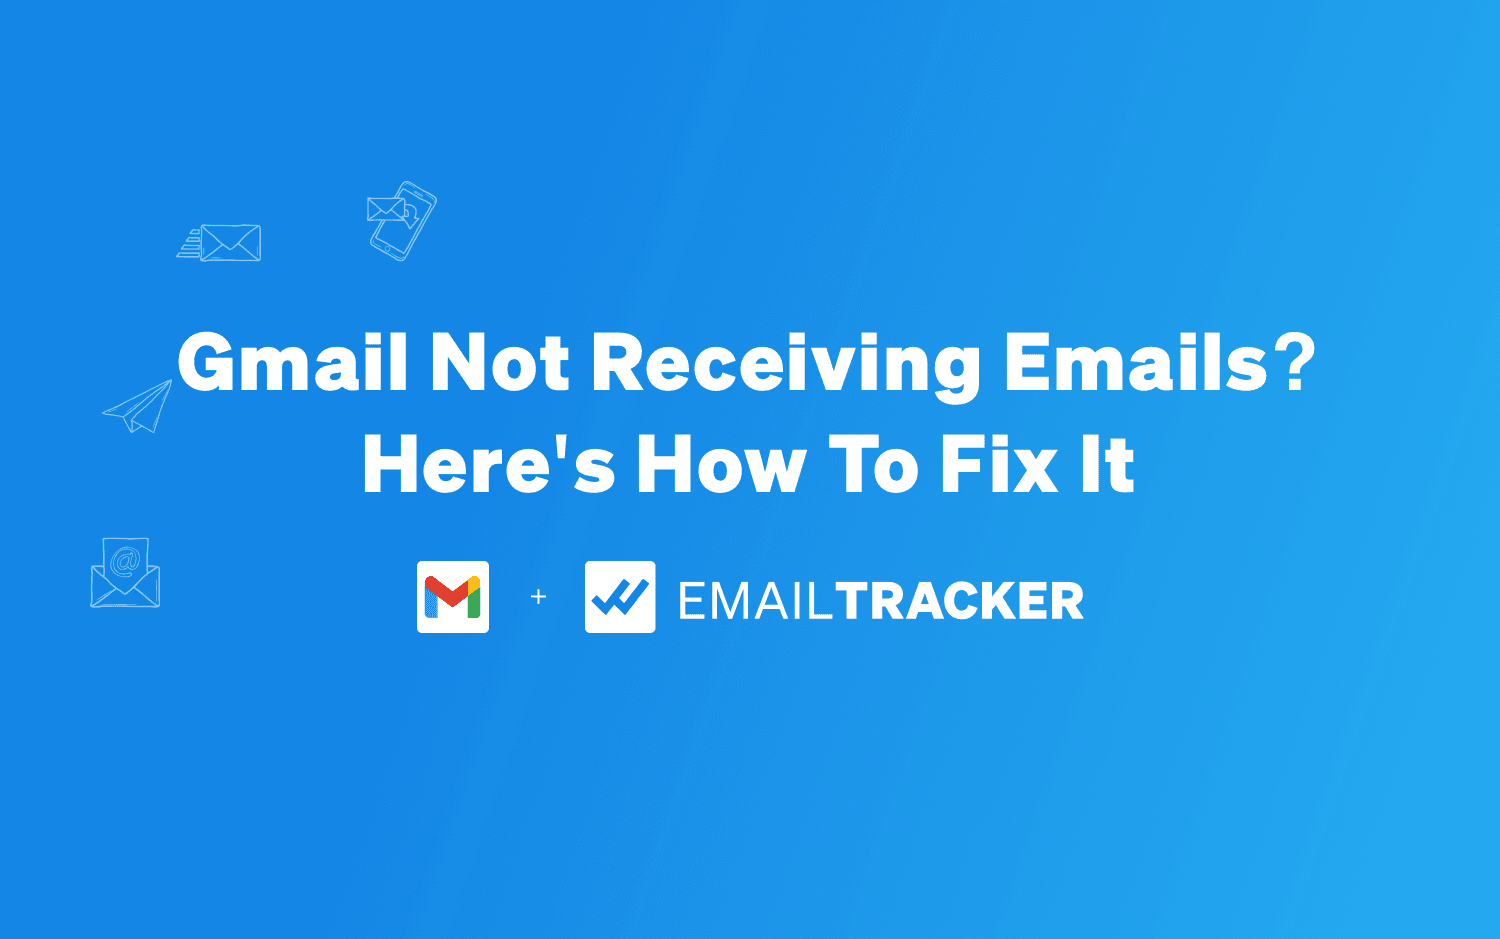  Gmail Not Receiving Emails? Here's How To Fix It